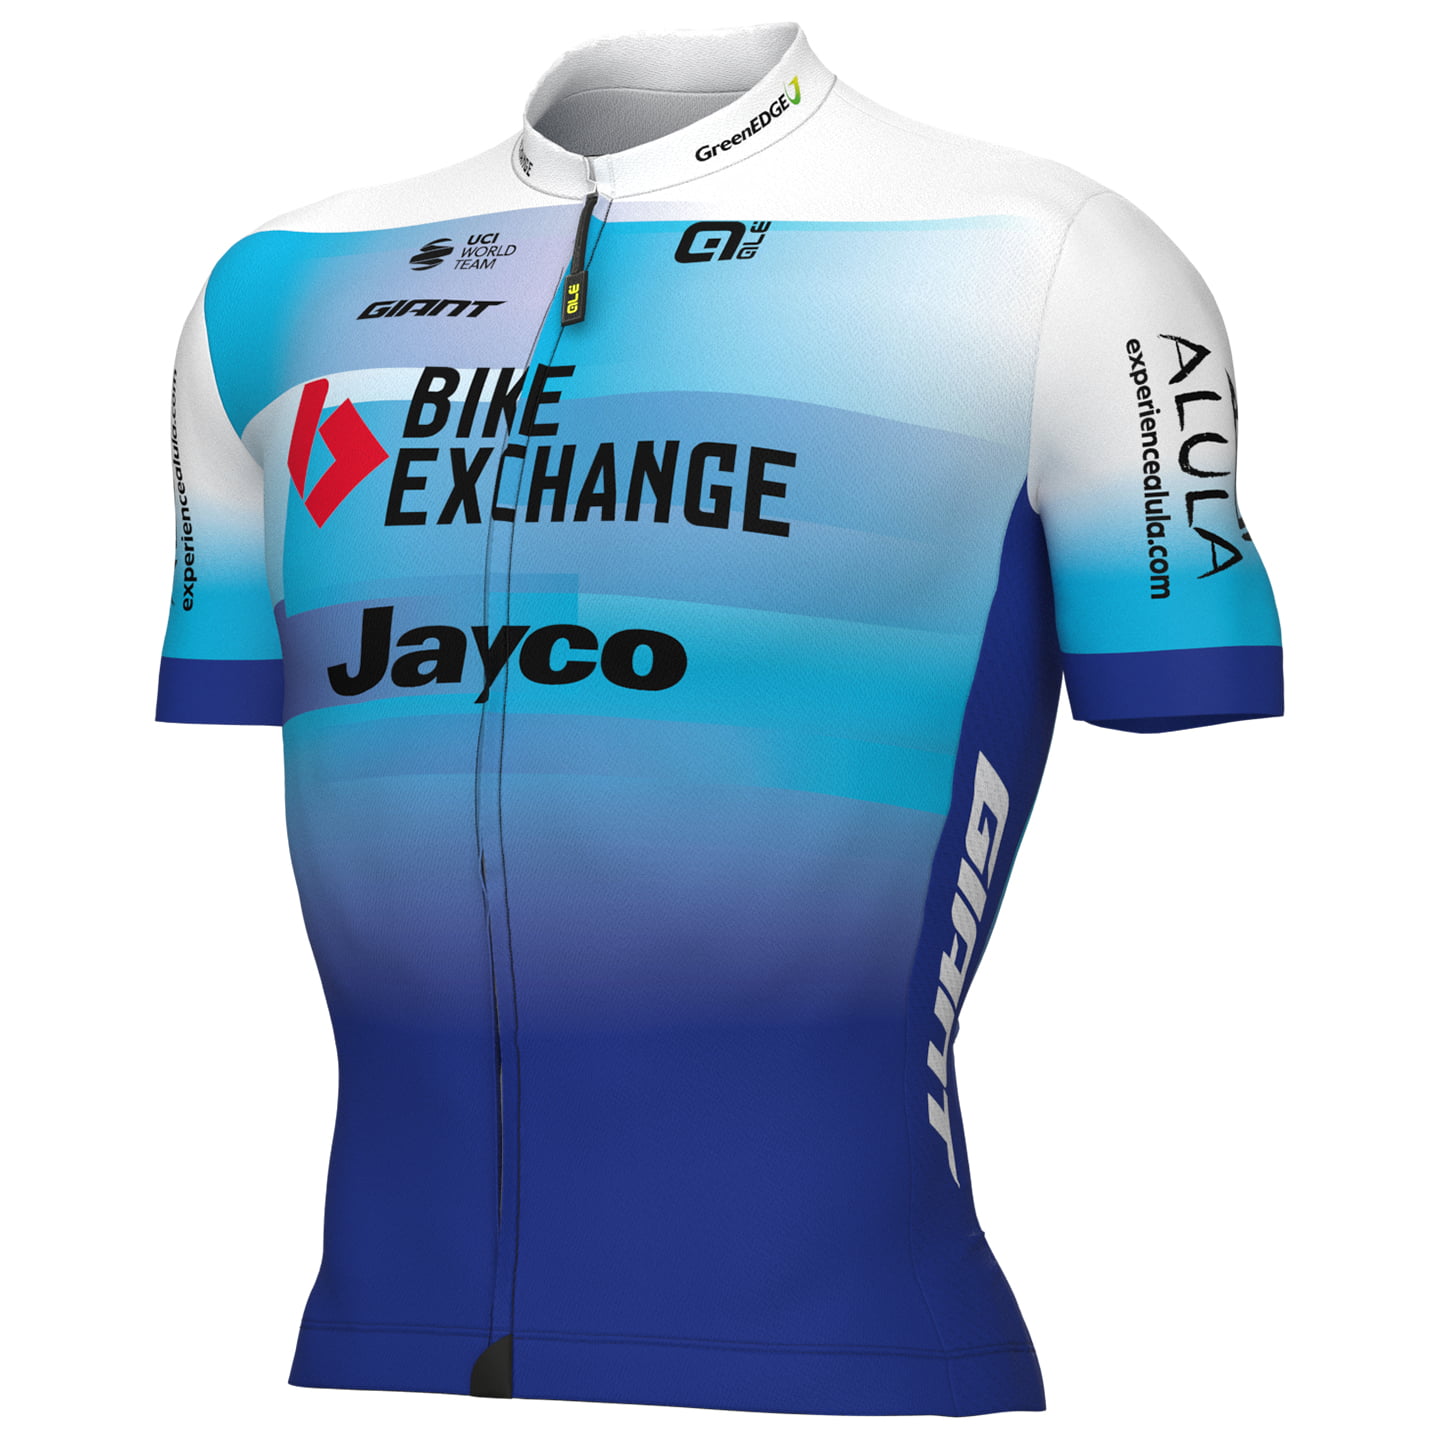 TEAM BIKEEXCHANGE-JAYCO 2022 Short Sleeve Jersey, for men, size L, Cycling shirt, Cycle clothing